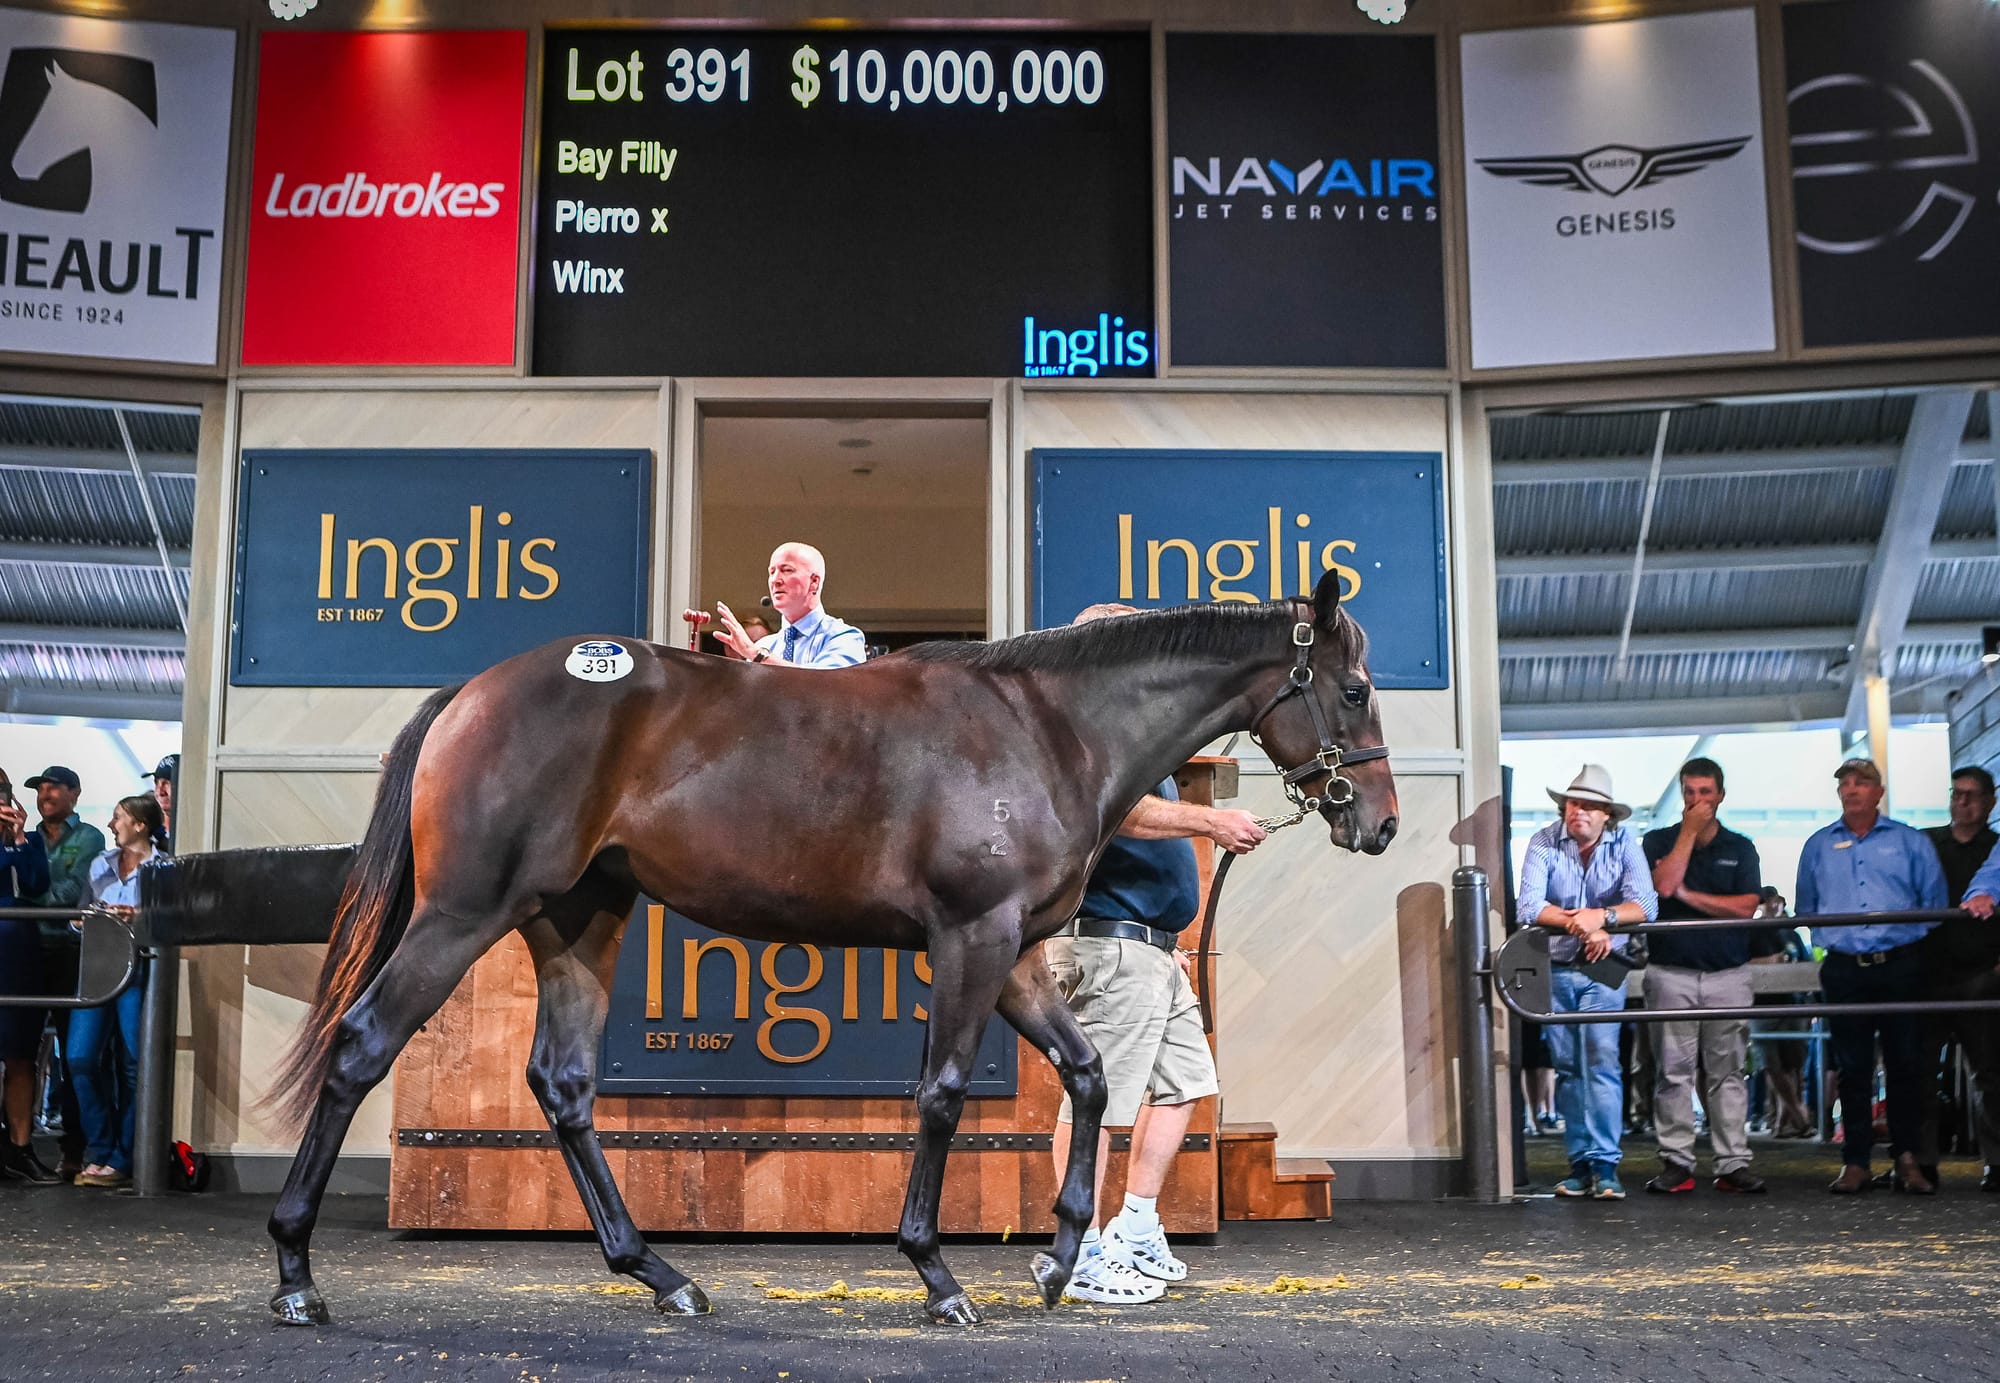 The $10 million filly by Winx out of Pierro